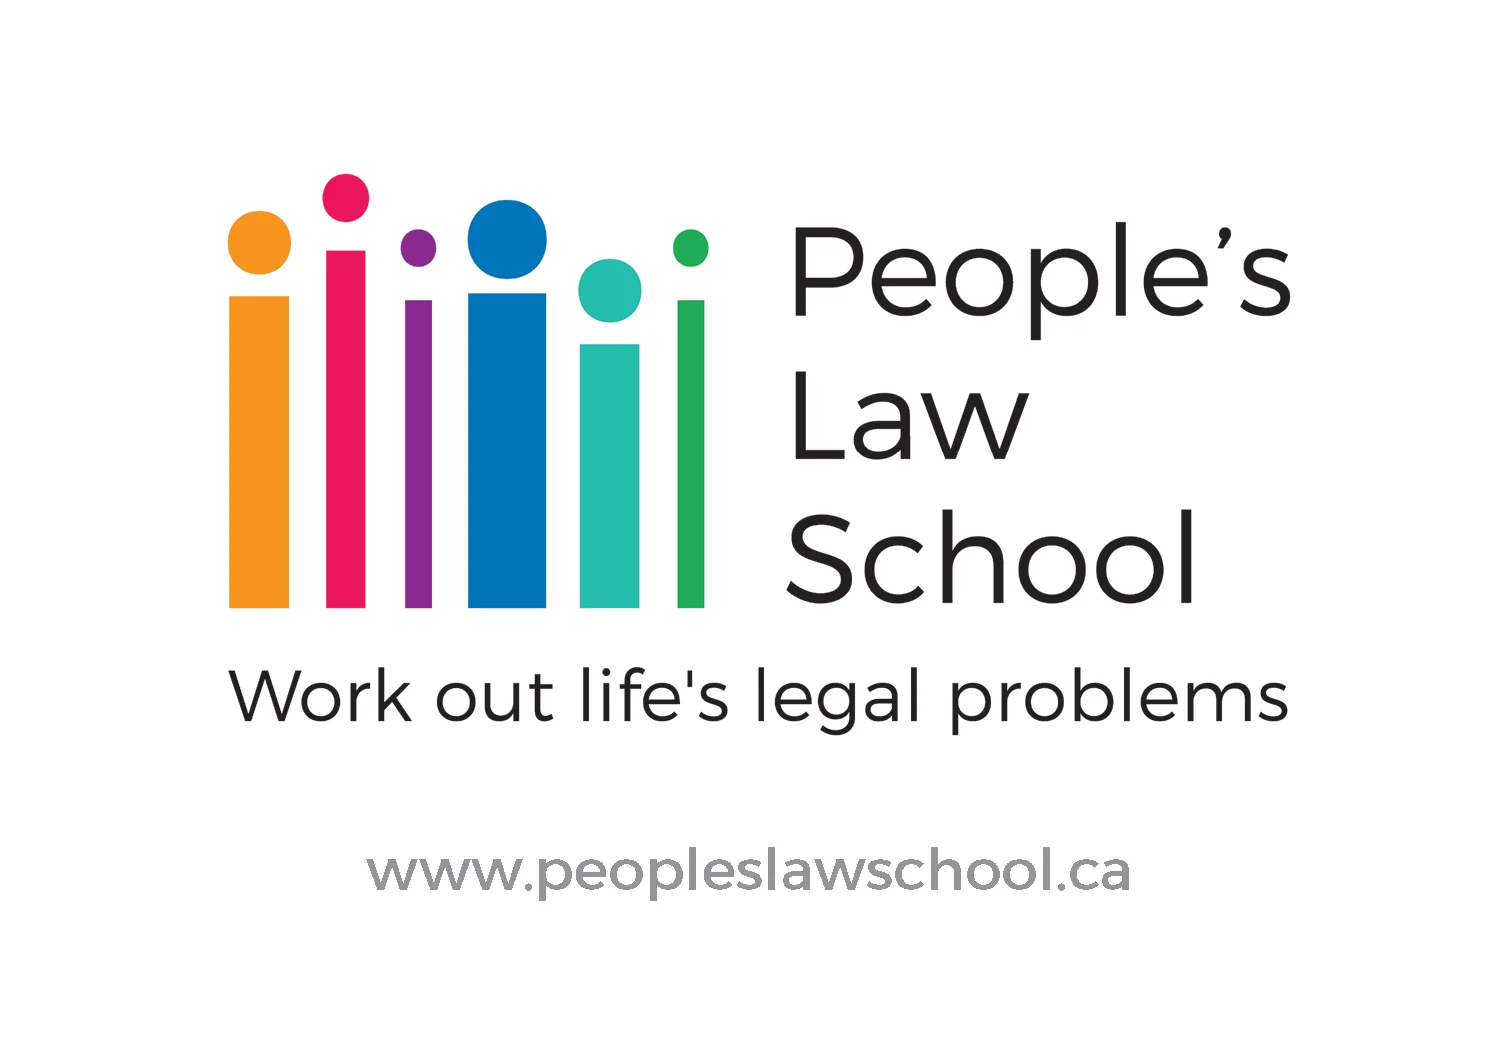 Cover of People's Law School Postcard